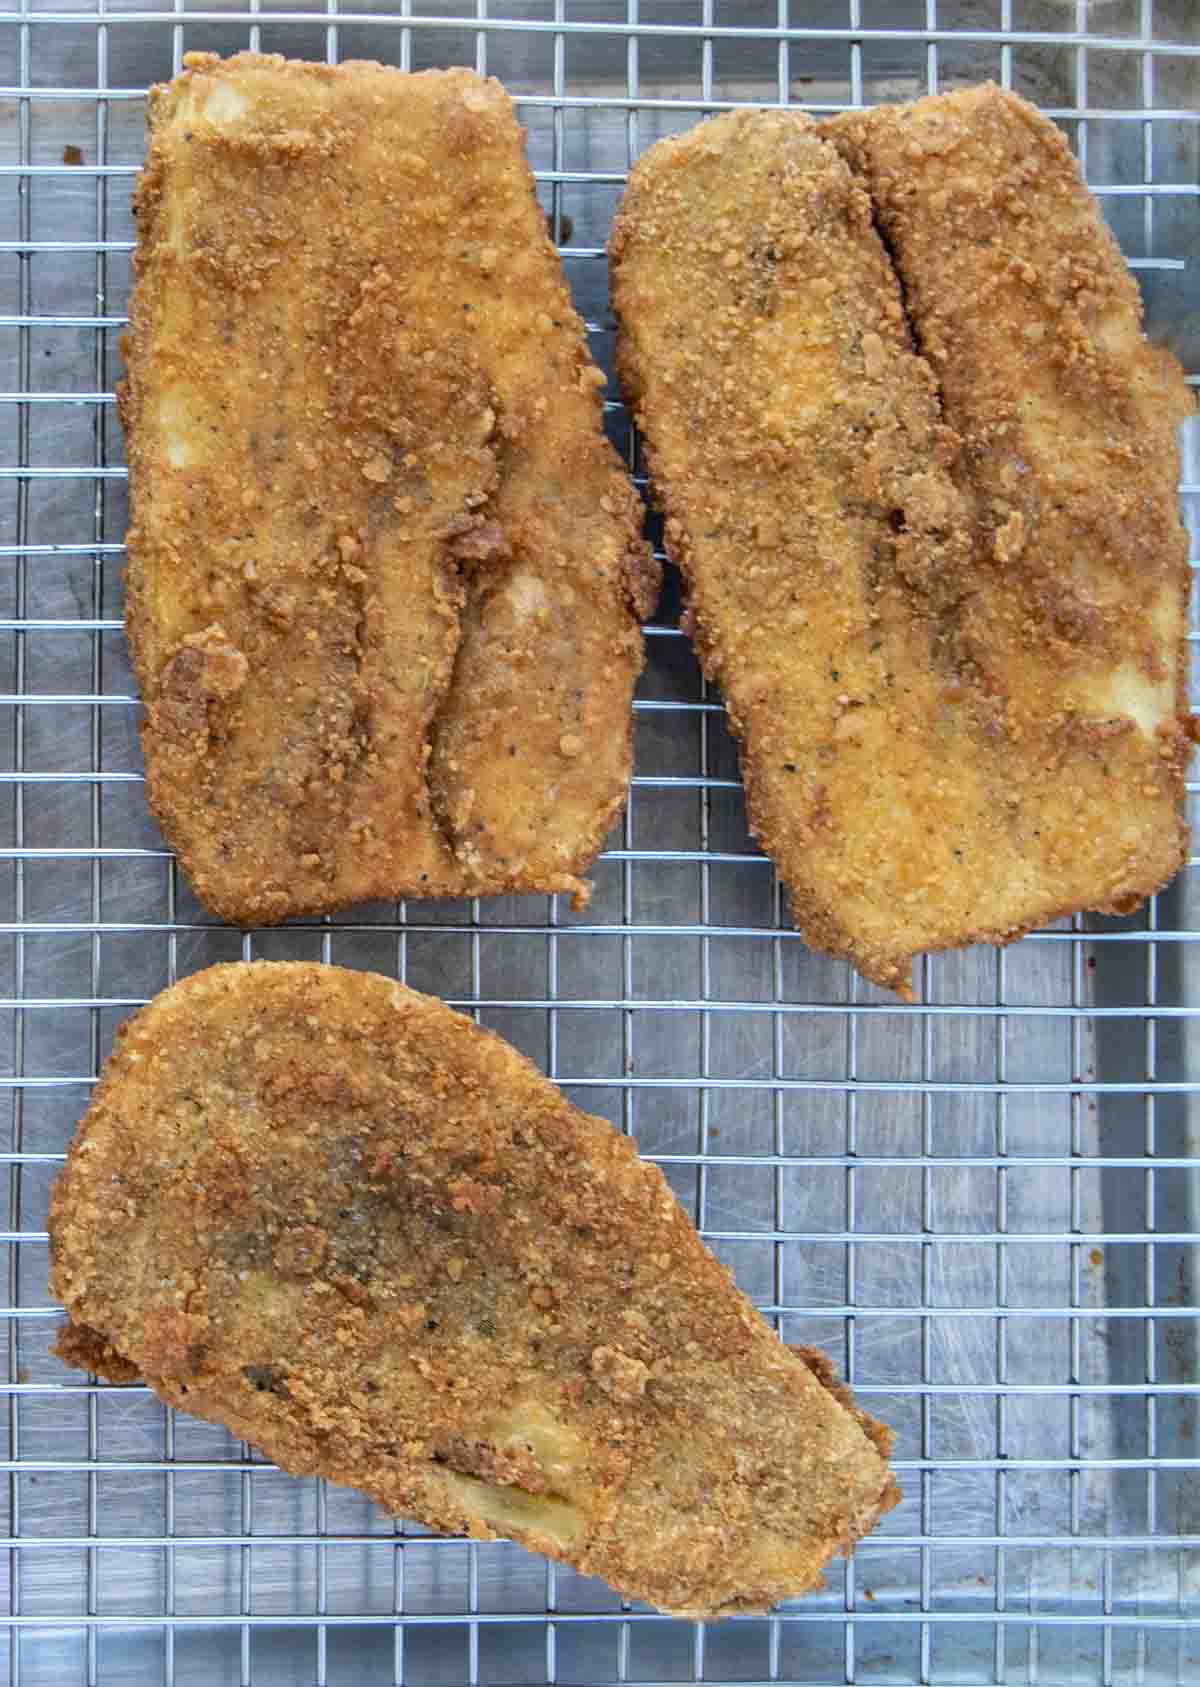 fried eggplant cutlets draining on a screen over a sheet pan